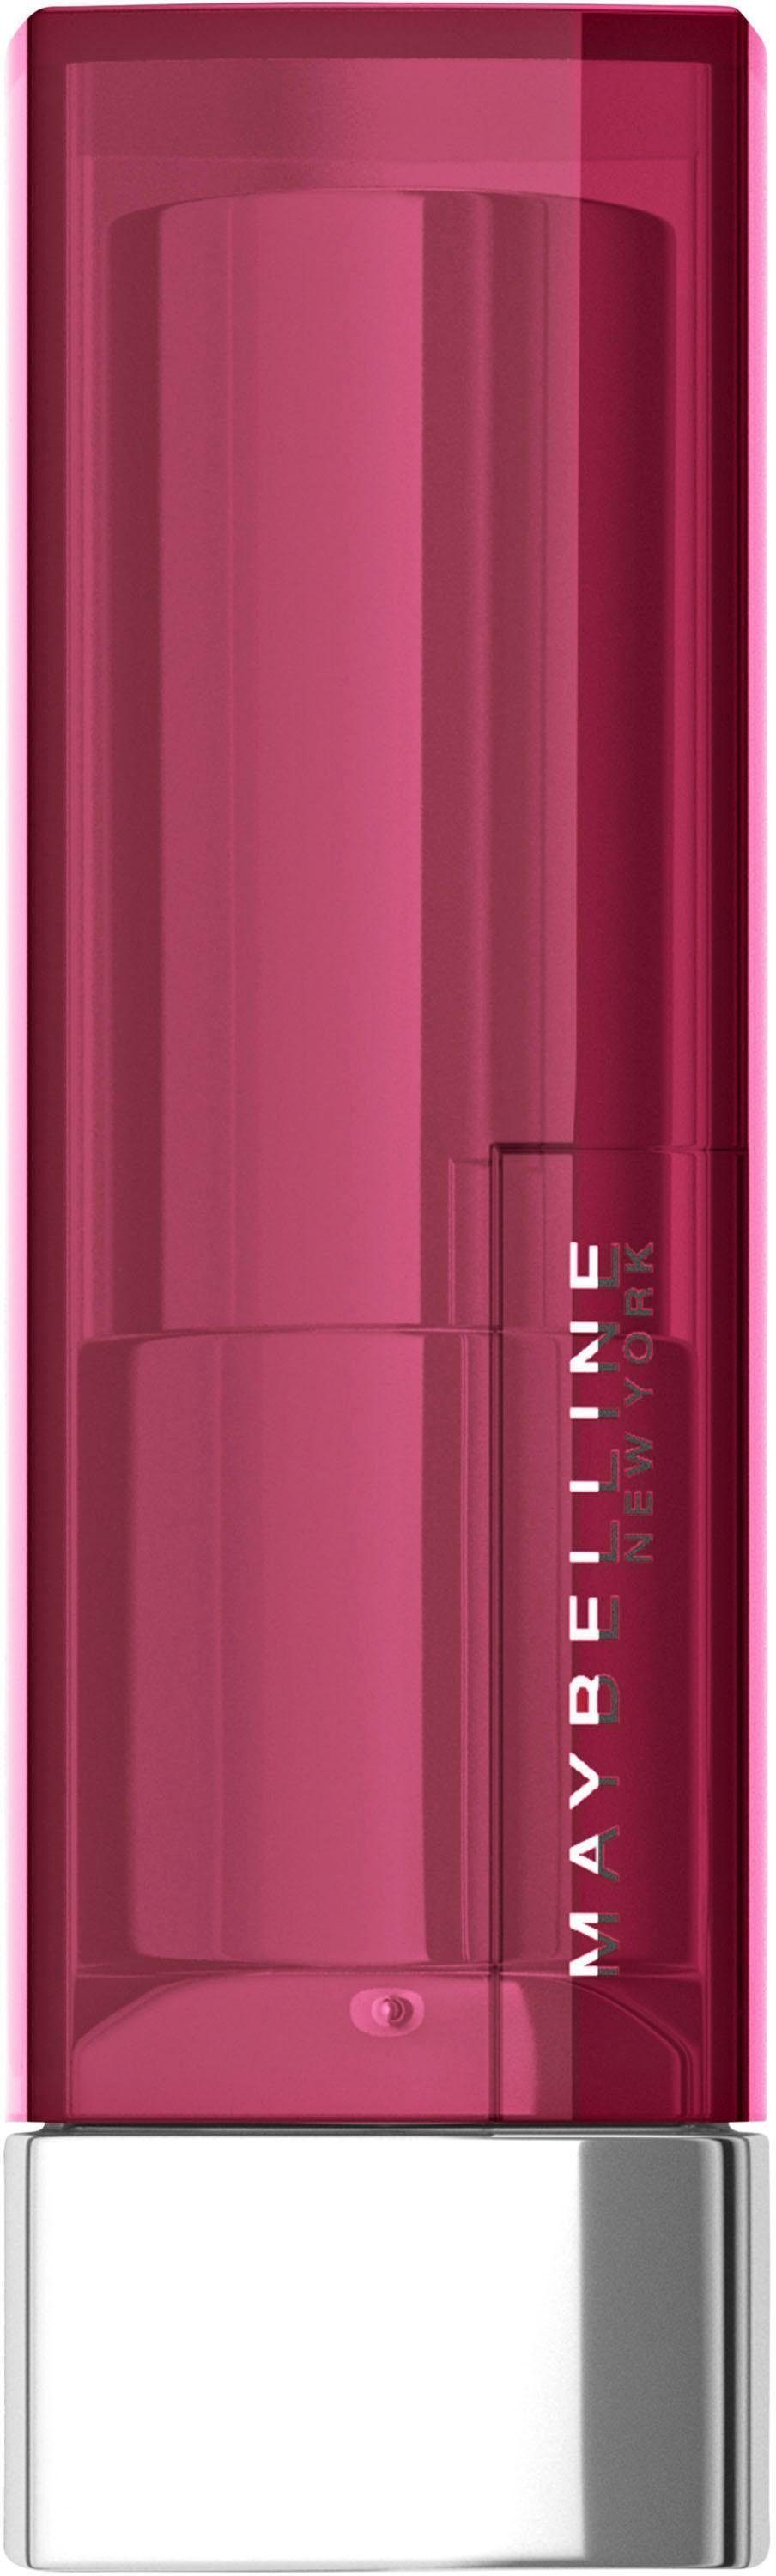 Lippenstift Pink Sensational NEW Creams Thrill MAYBELLINE 266 the Color YORK